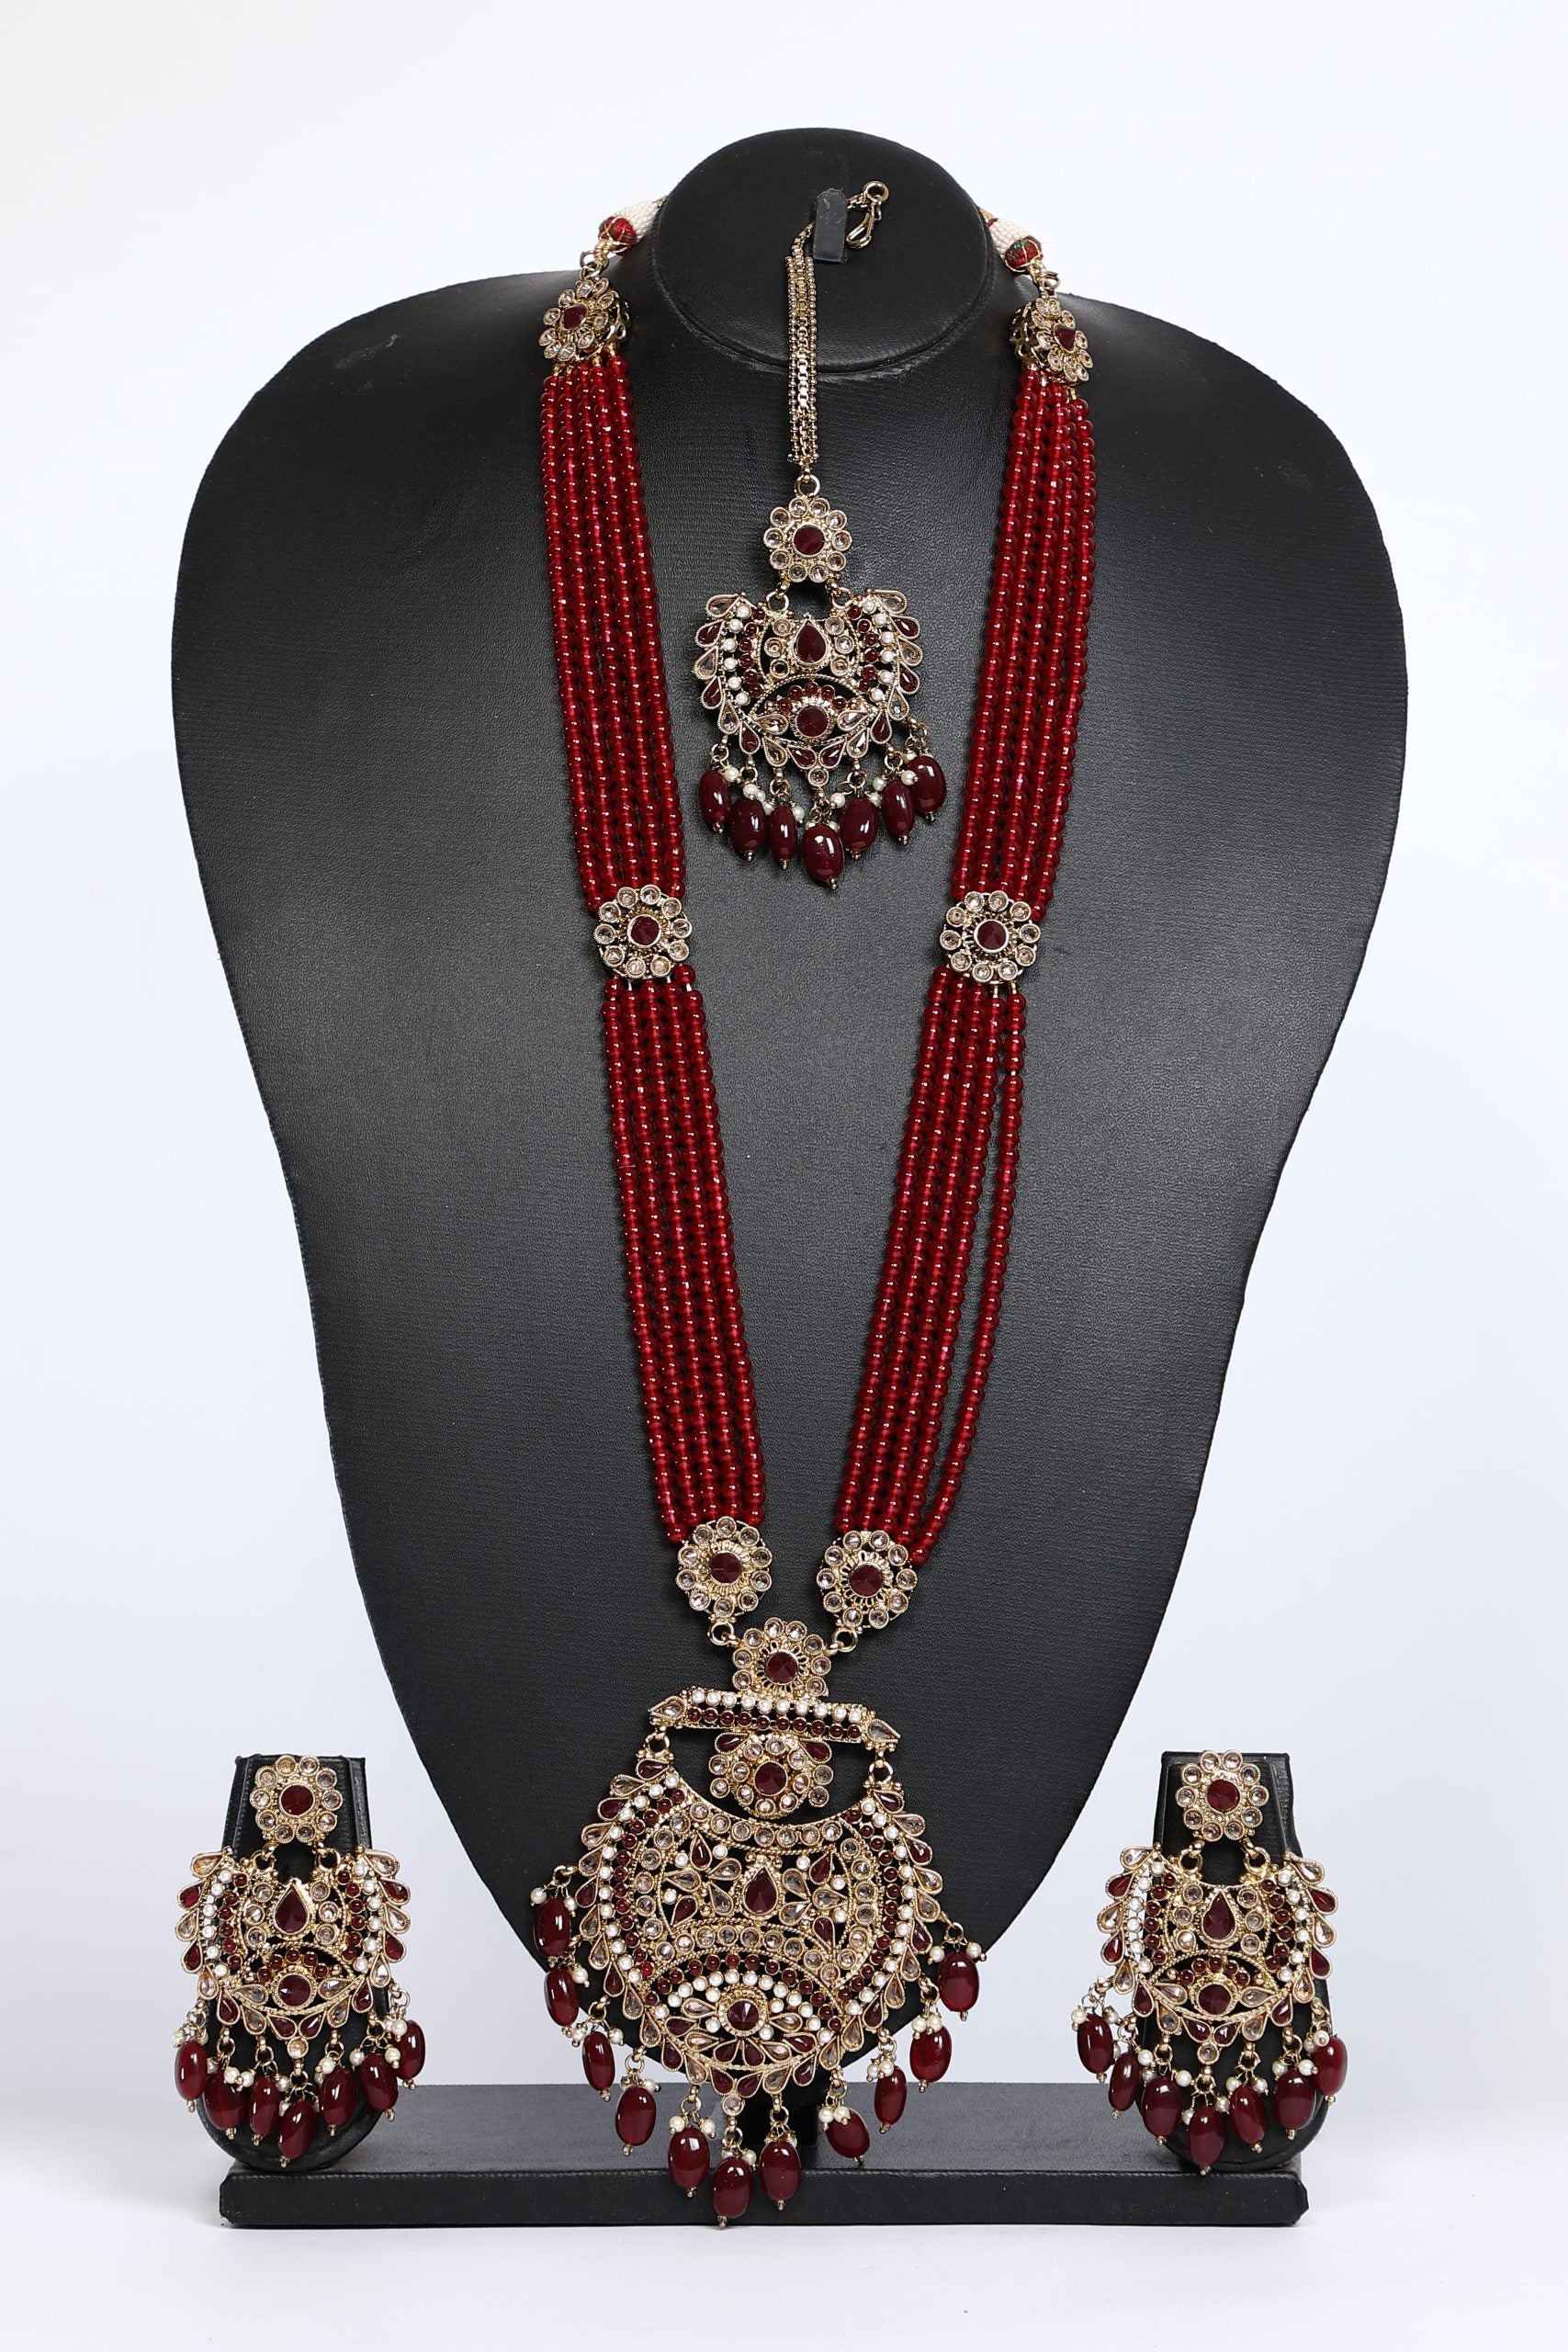 Beaded Long Necklace Set in Maroon Color For Bridal - 3594